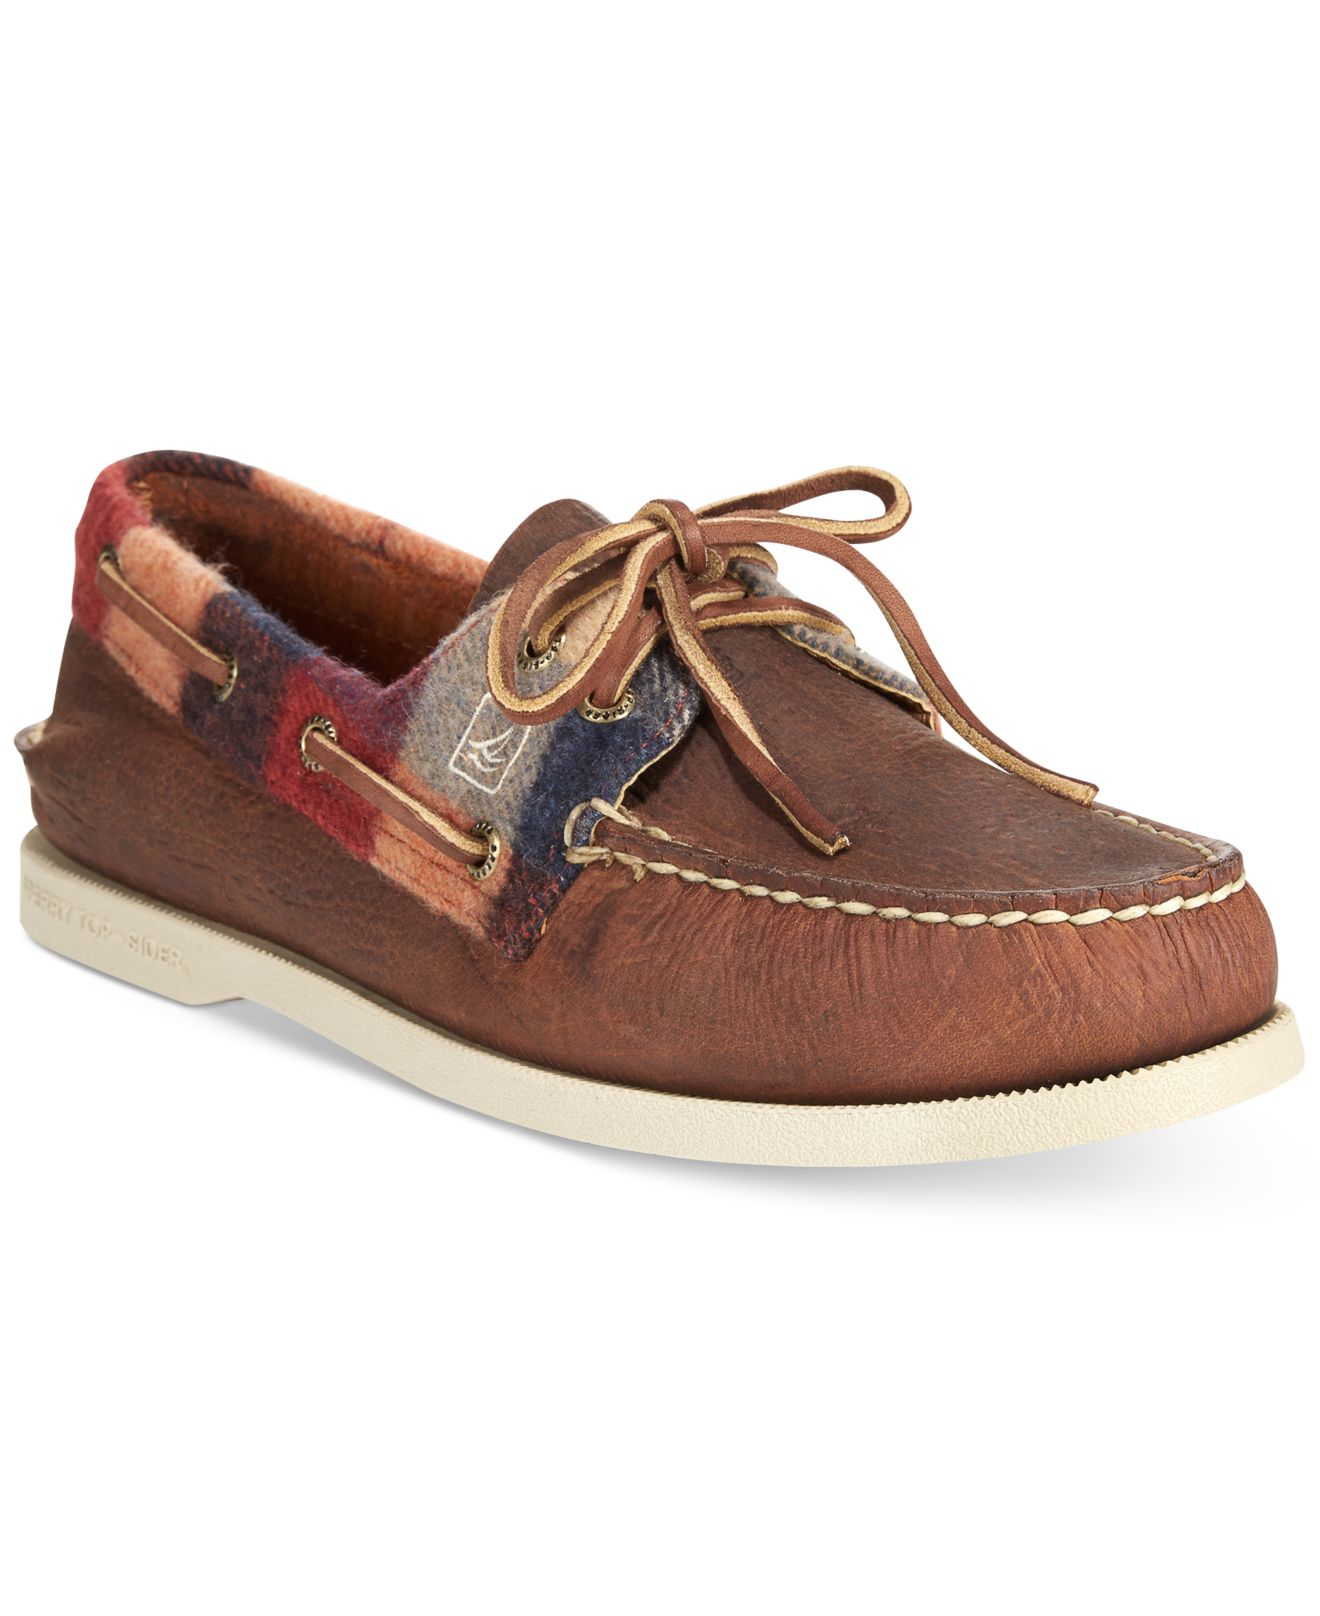 Lyst - Sperry Top-Sider A/o 3-eye Plaid Canvas Boat Shoes in Brown for Men